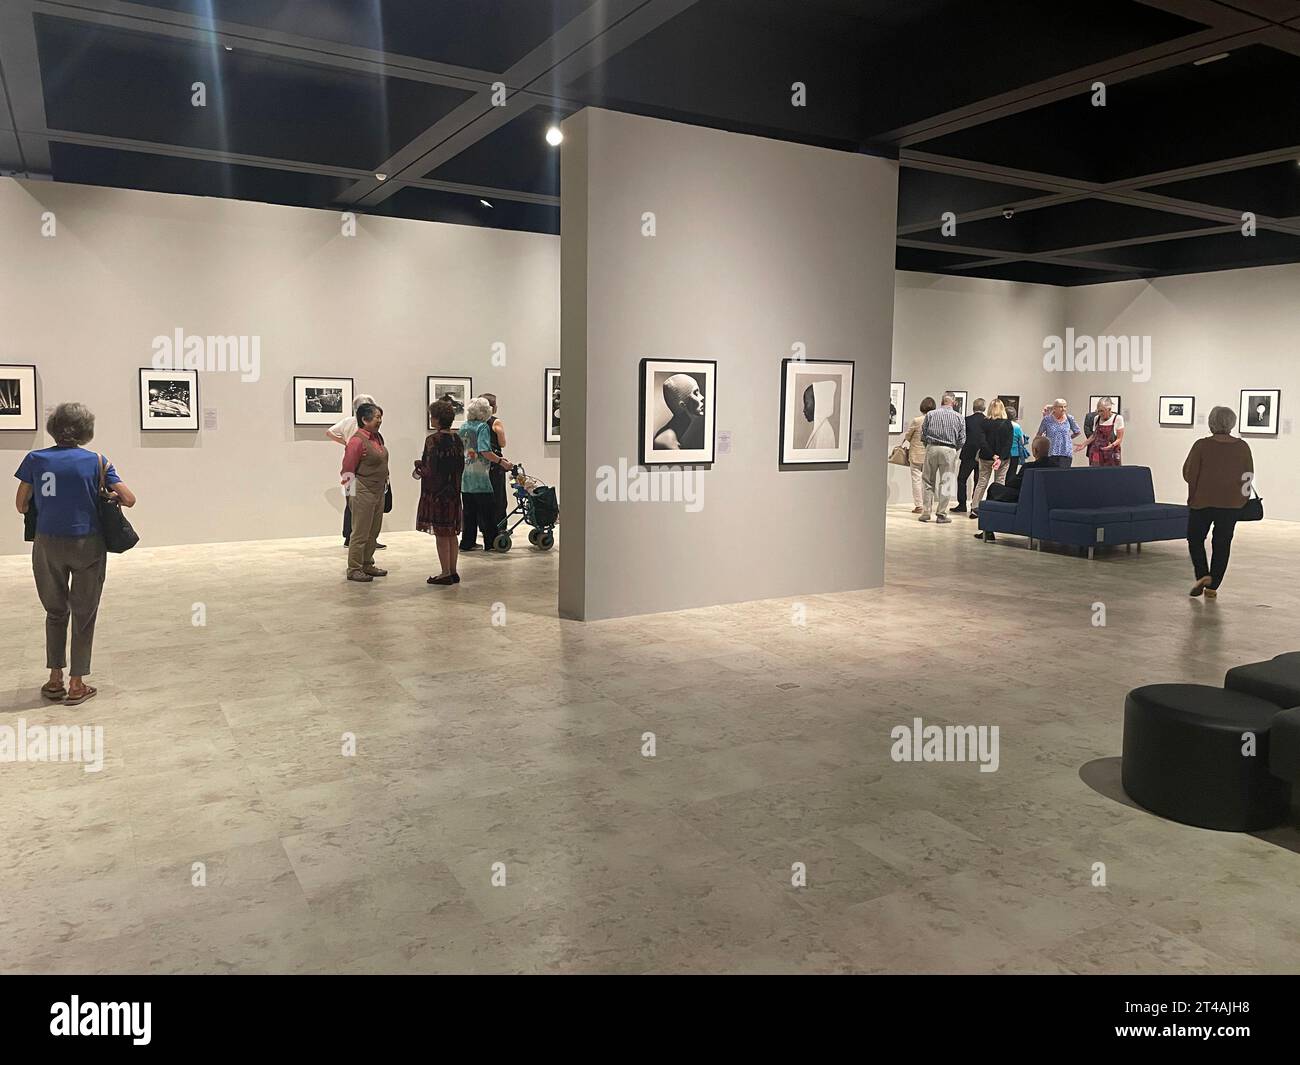 People attending an exhibition of fine art photography titled The Power of Photography at the Bowers Museum in Santa Ana, Orange County, CA., USA Stock Photo